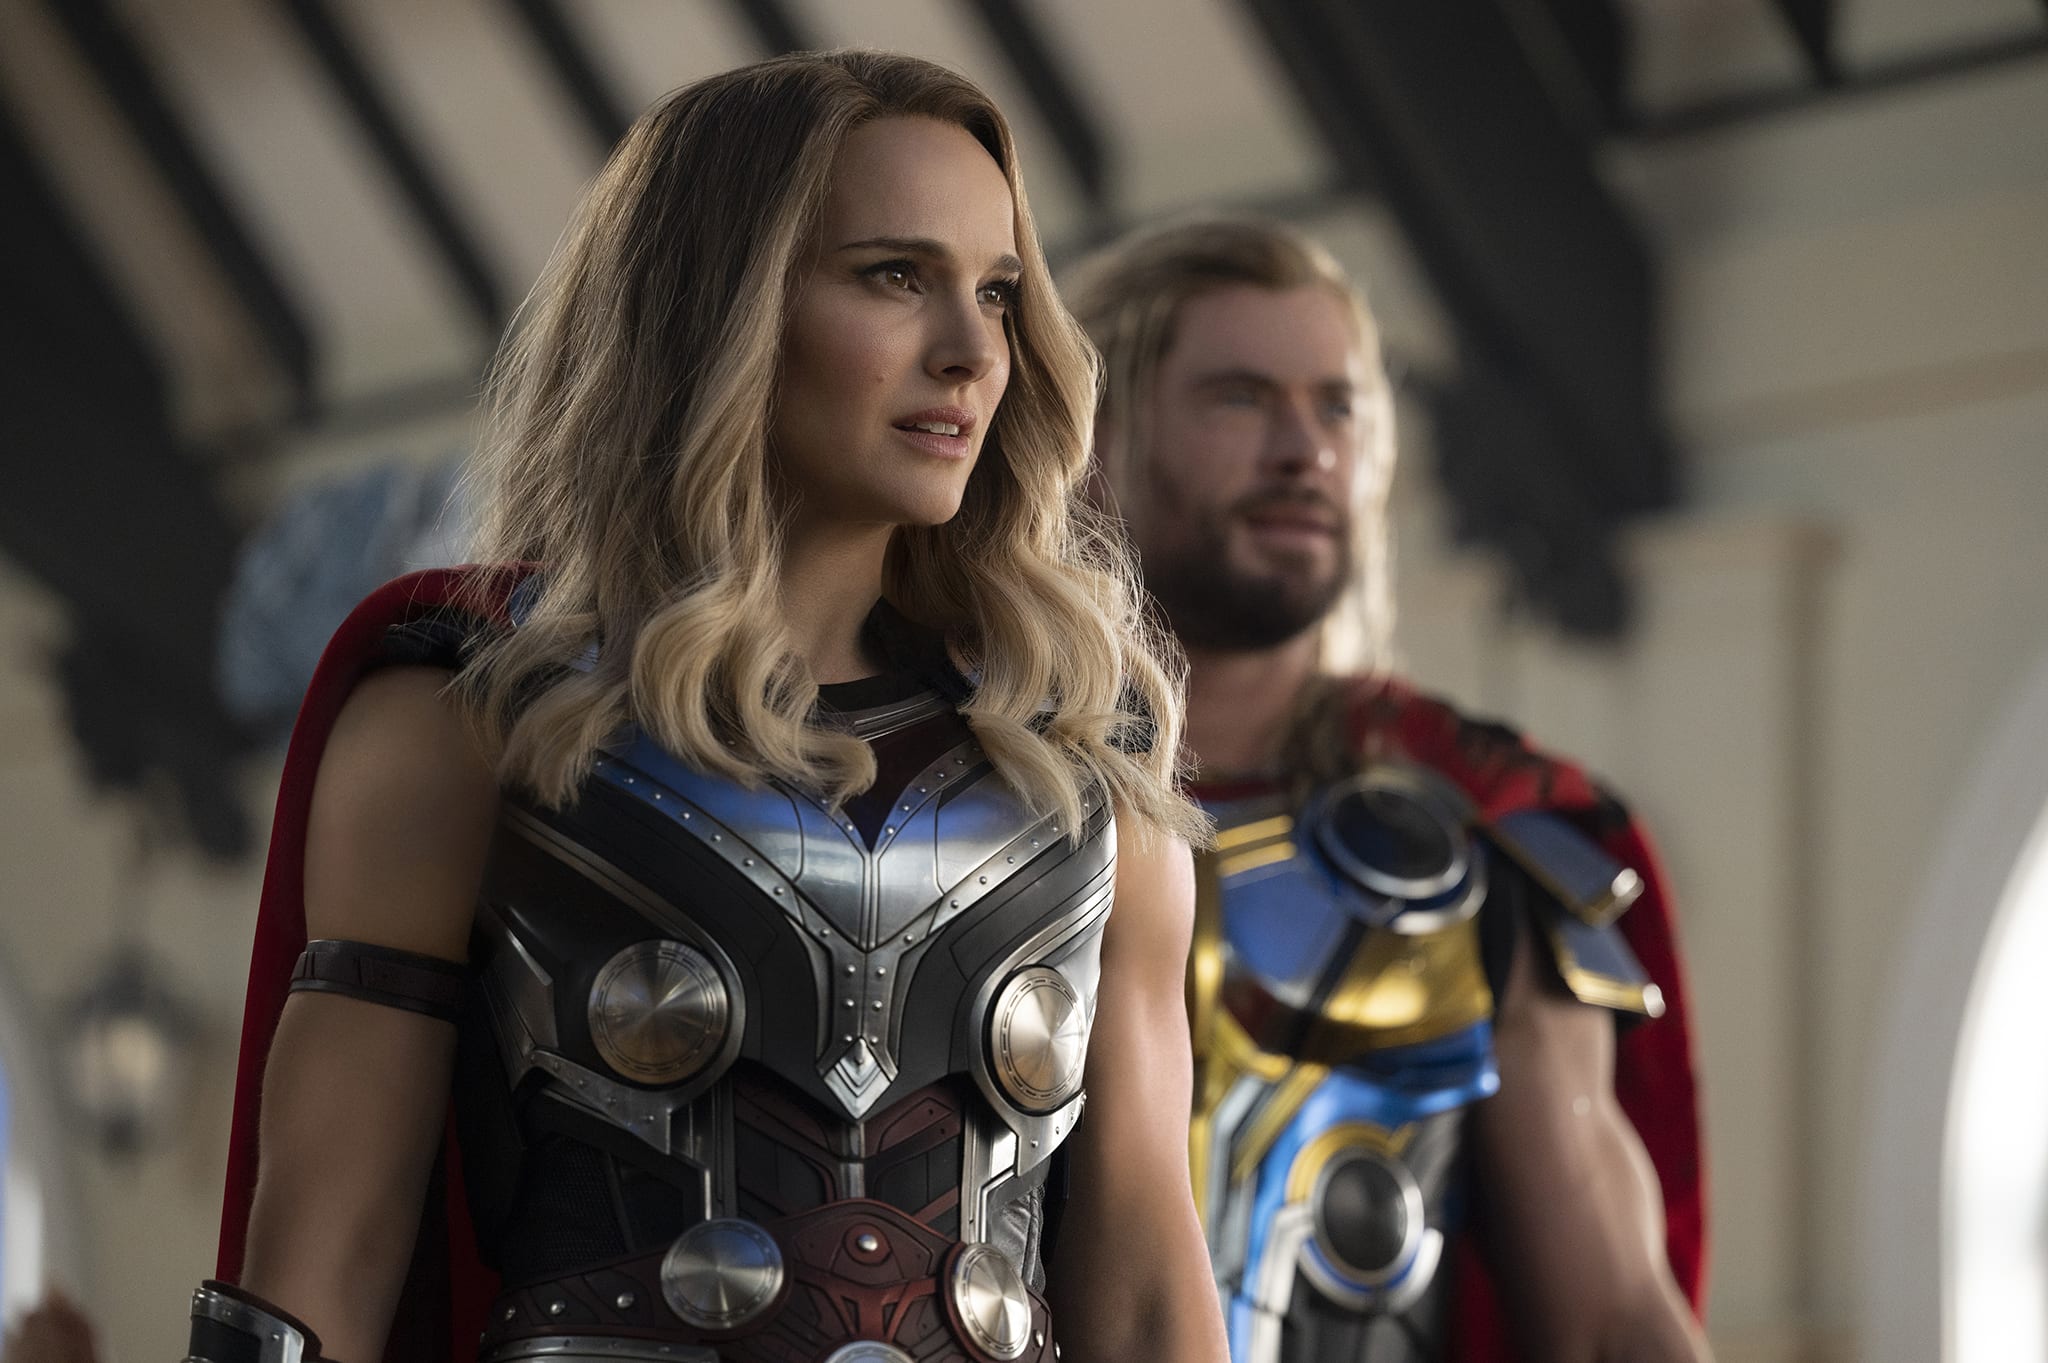 Natalie Portman reprises her role as Jane Foster/Mighty Thor in Thor: Love and Thunder